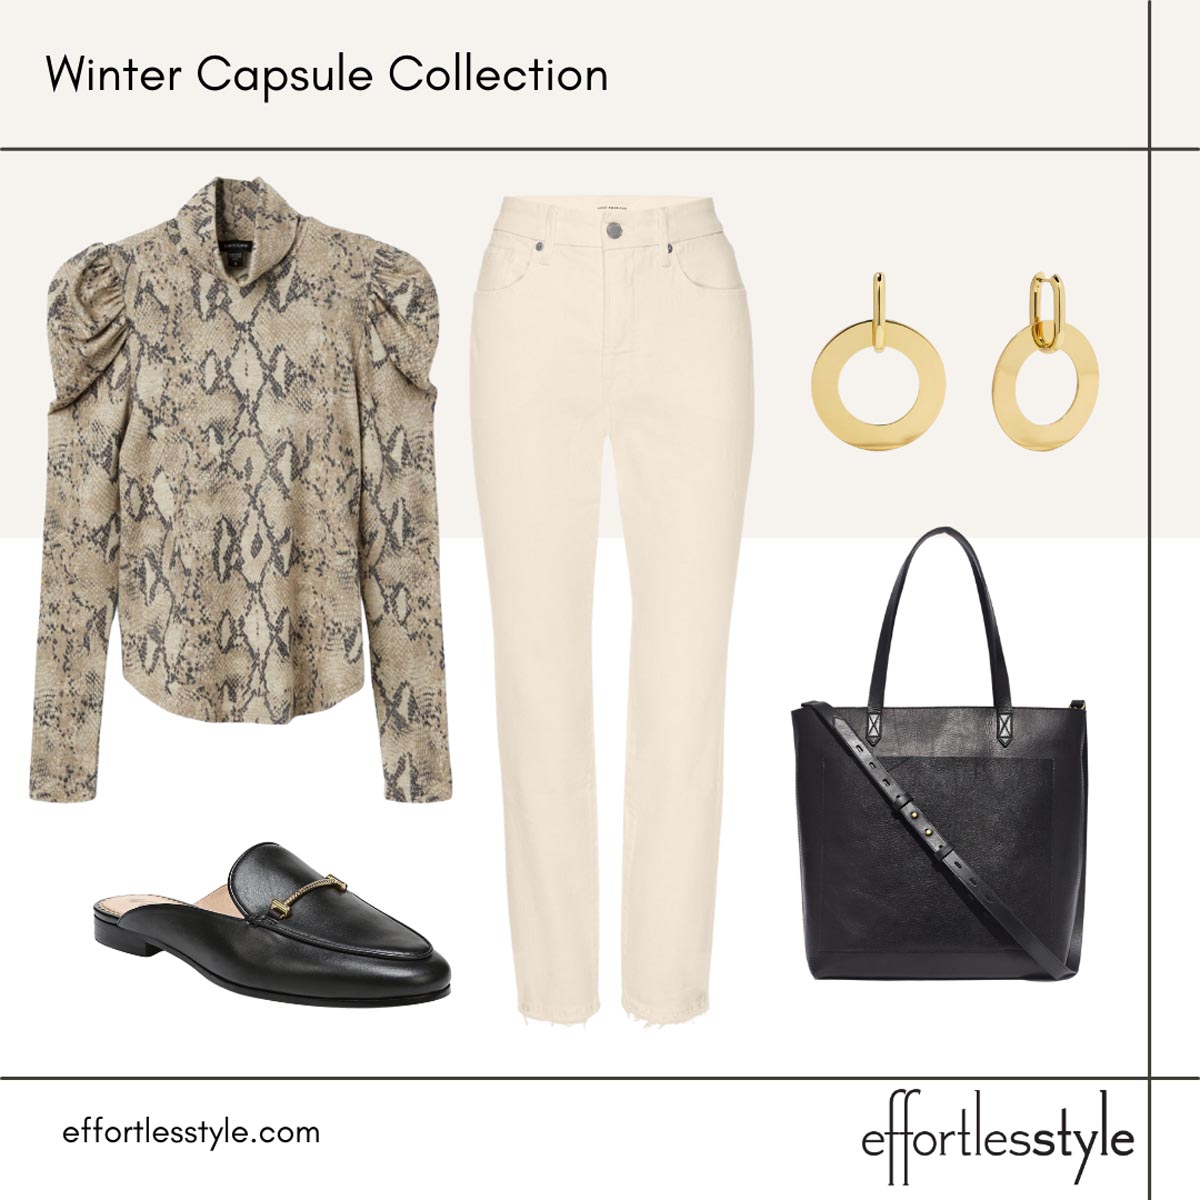 Winter Capsule Collection Snakeskin Printed Turtleneck Outfit